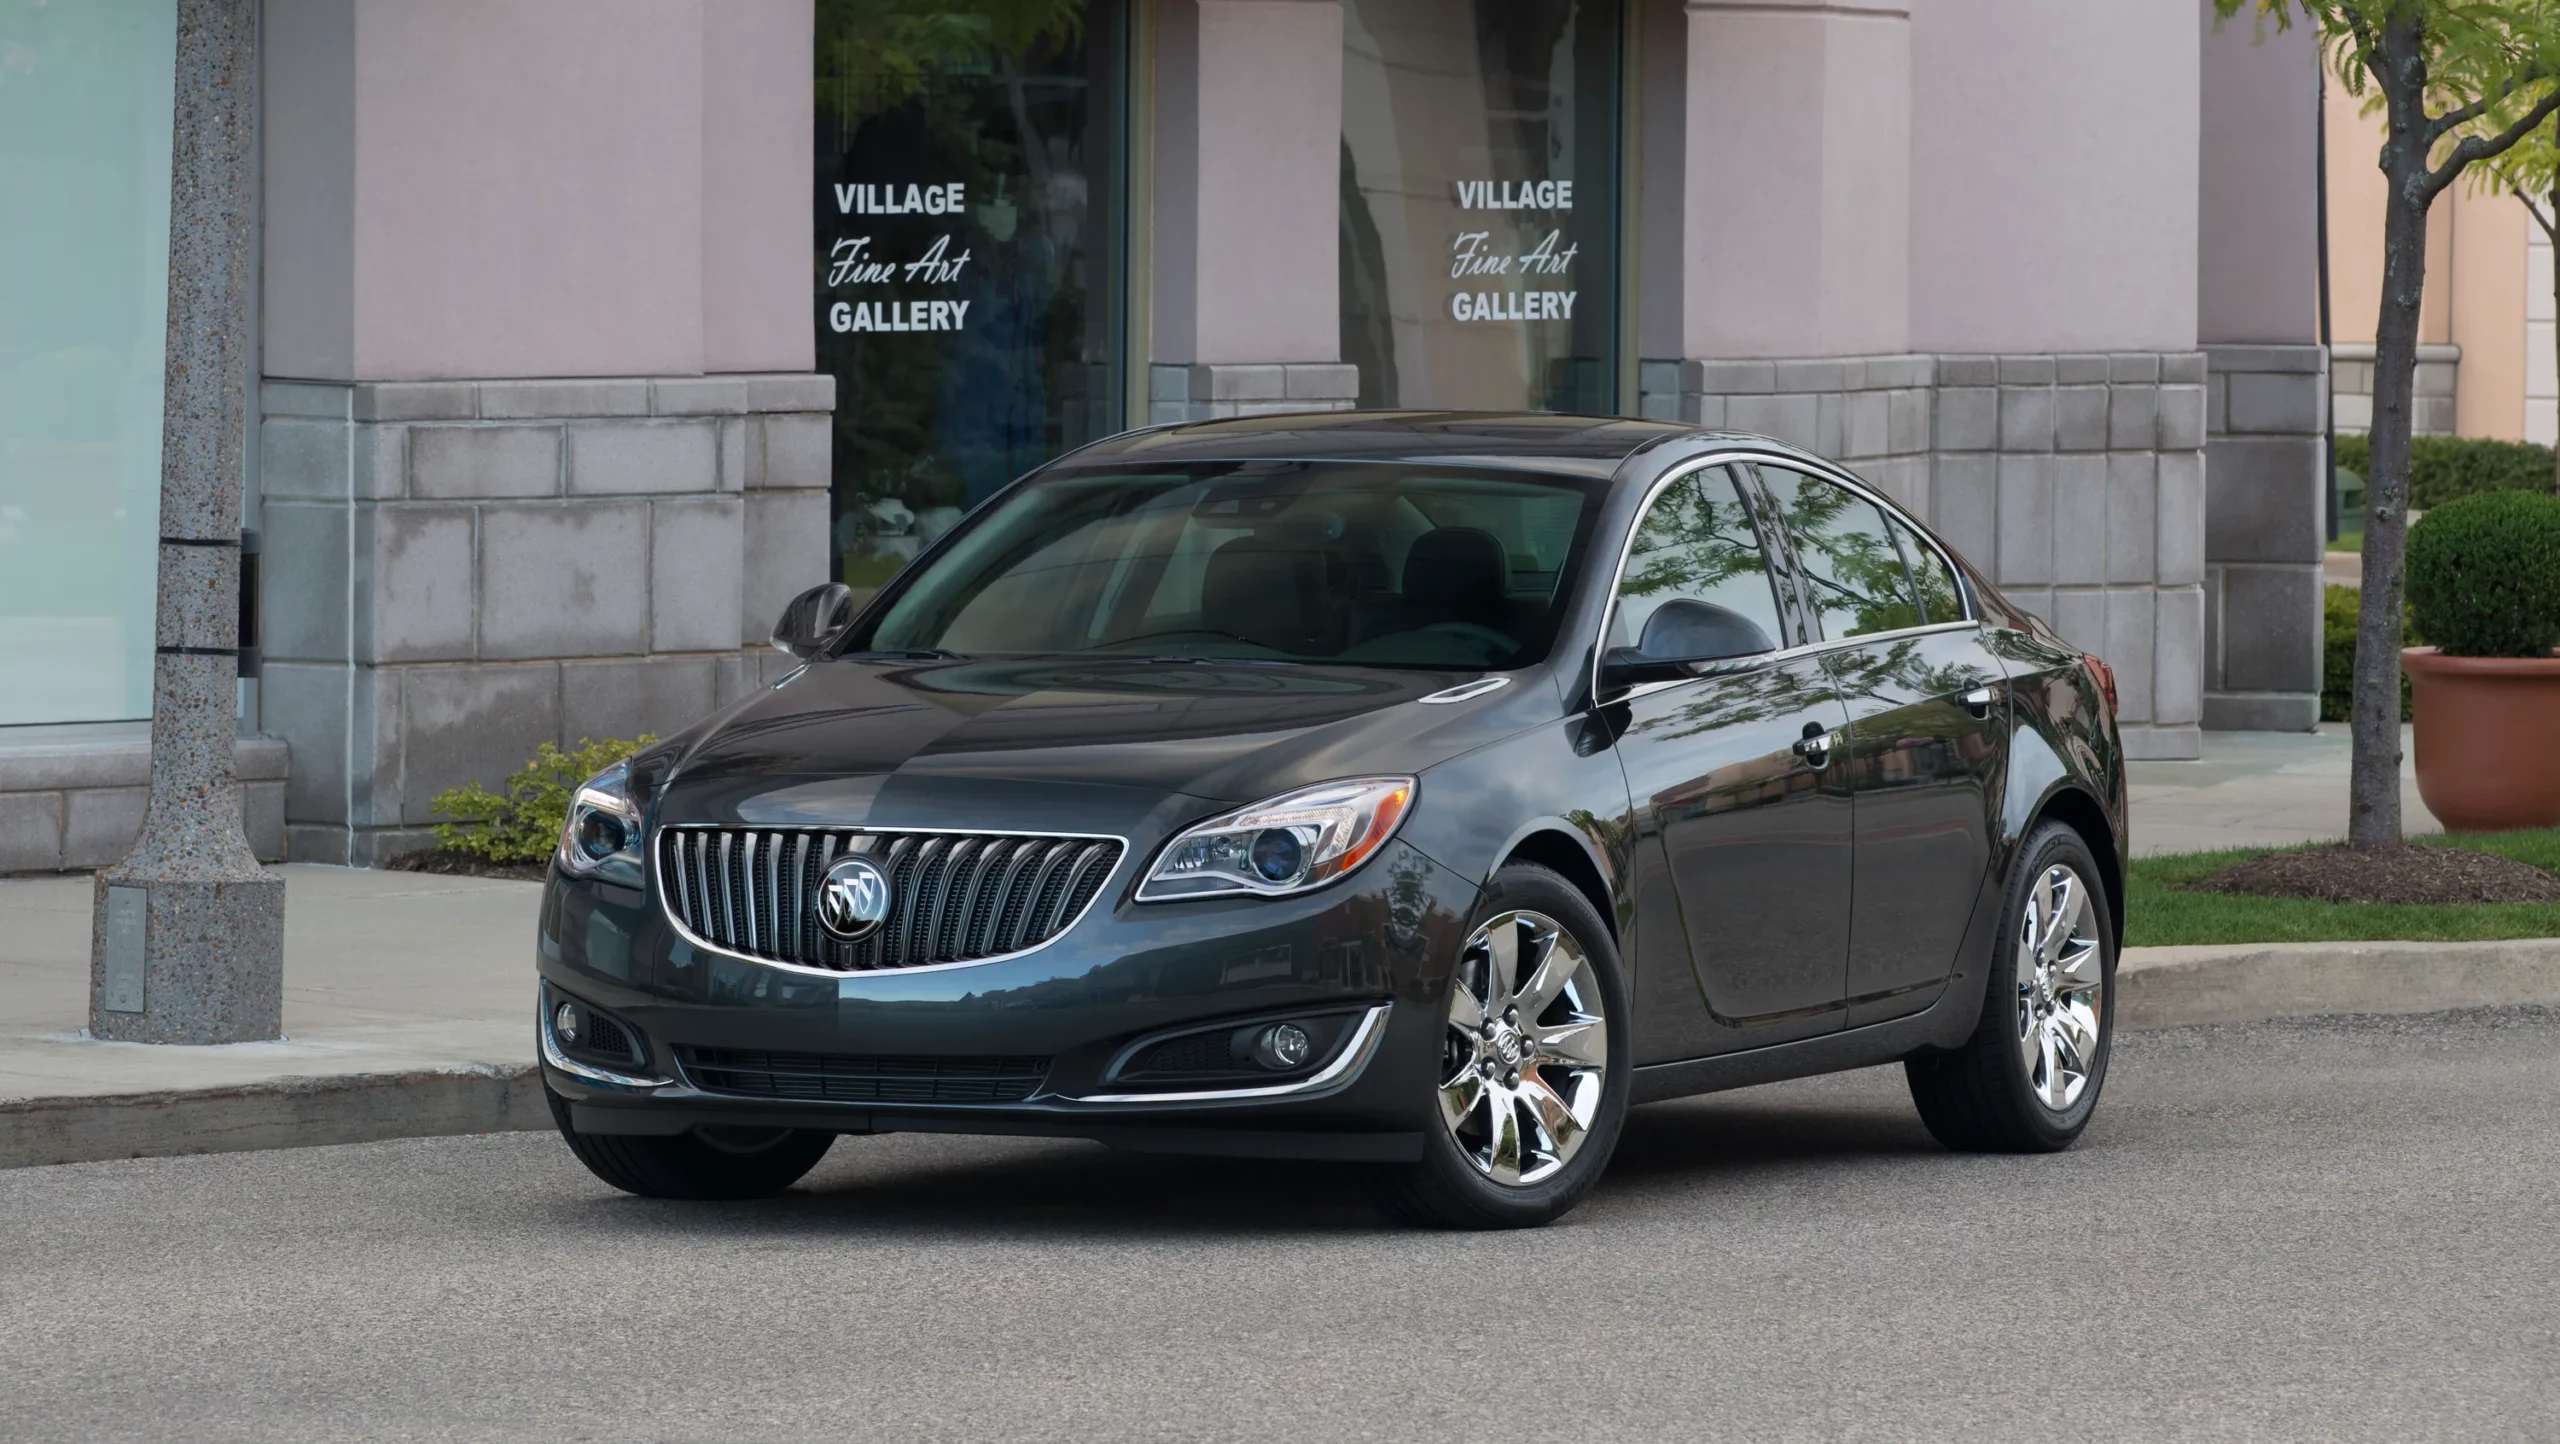 Buick Regal 2014 featured